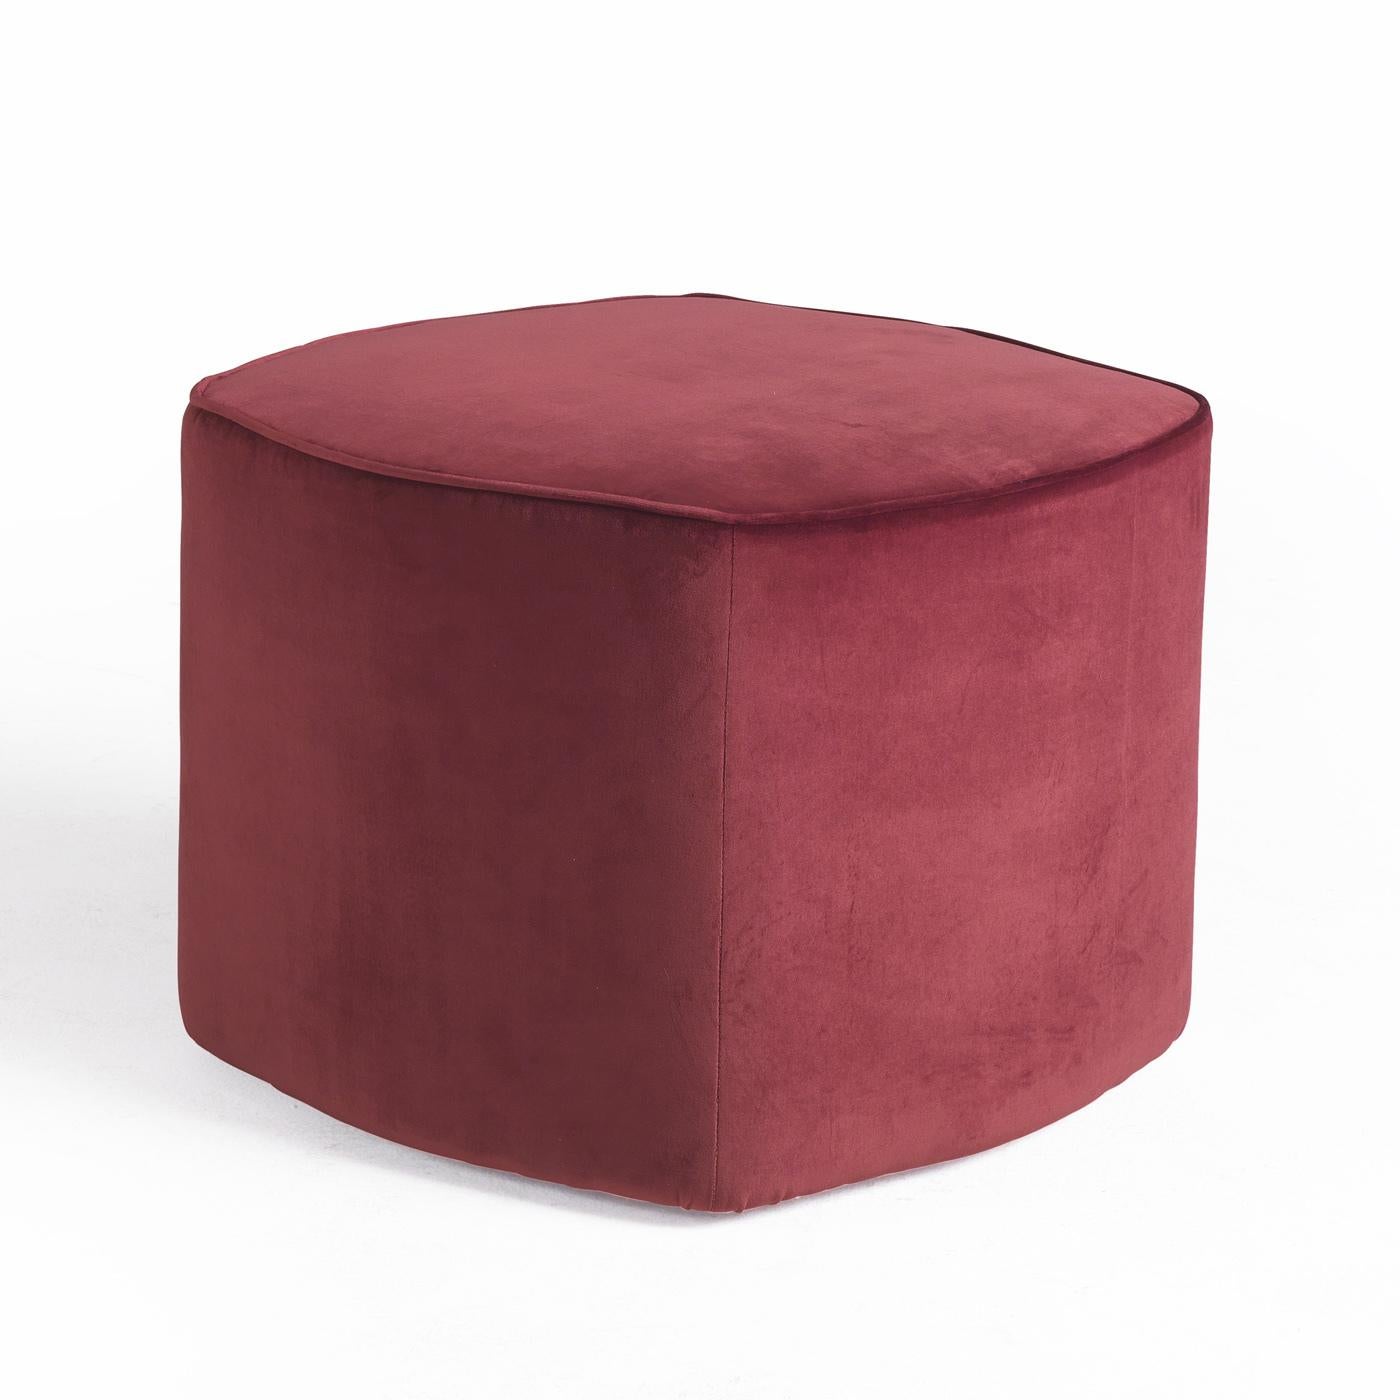 Part of a collection exuding passion and romantic allure, this superb pouf will be a perfect addition to a vanity in a bedroom. Impeccable comfort wrapped in stylish red fabric, this pouf can be used as extra seating or occasional table in a modern